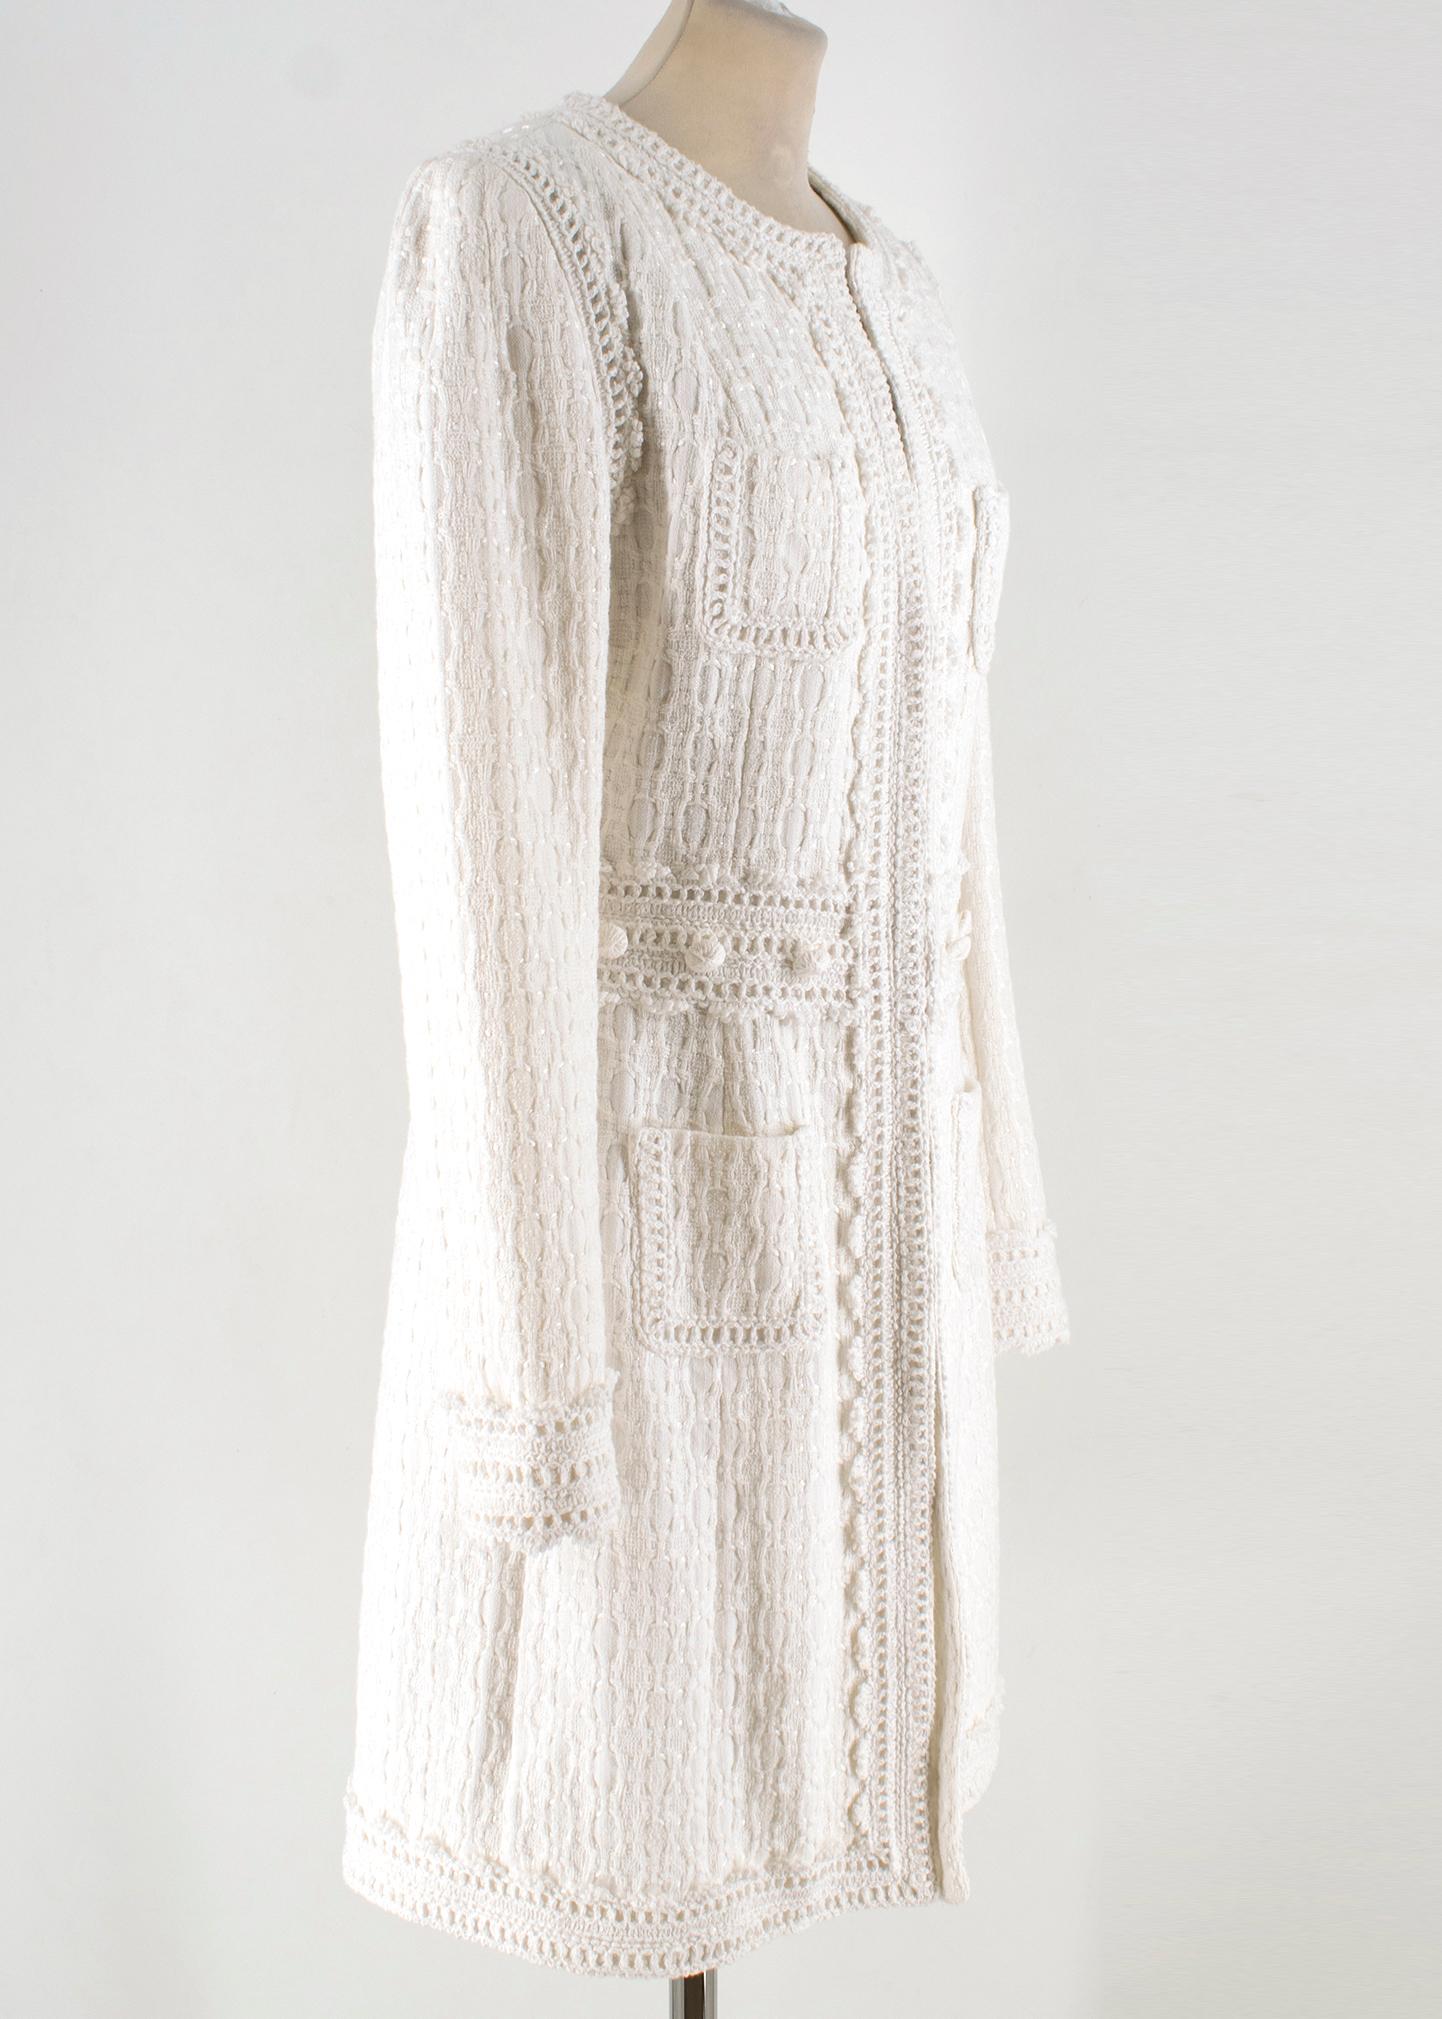 Andrew GN white collarless tweed coat

- White, heavyweight cotton-blend tweed 
- Collarless, round neck, long sleeves 
- White crochet-trimmed neckline, waistband, placket and hemline 
- Front patch pockets 
- White crochet-covered decorative waist